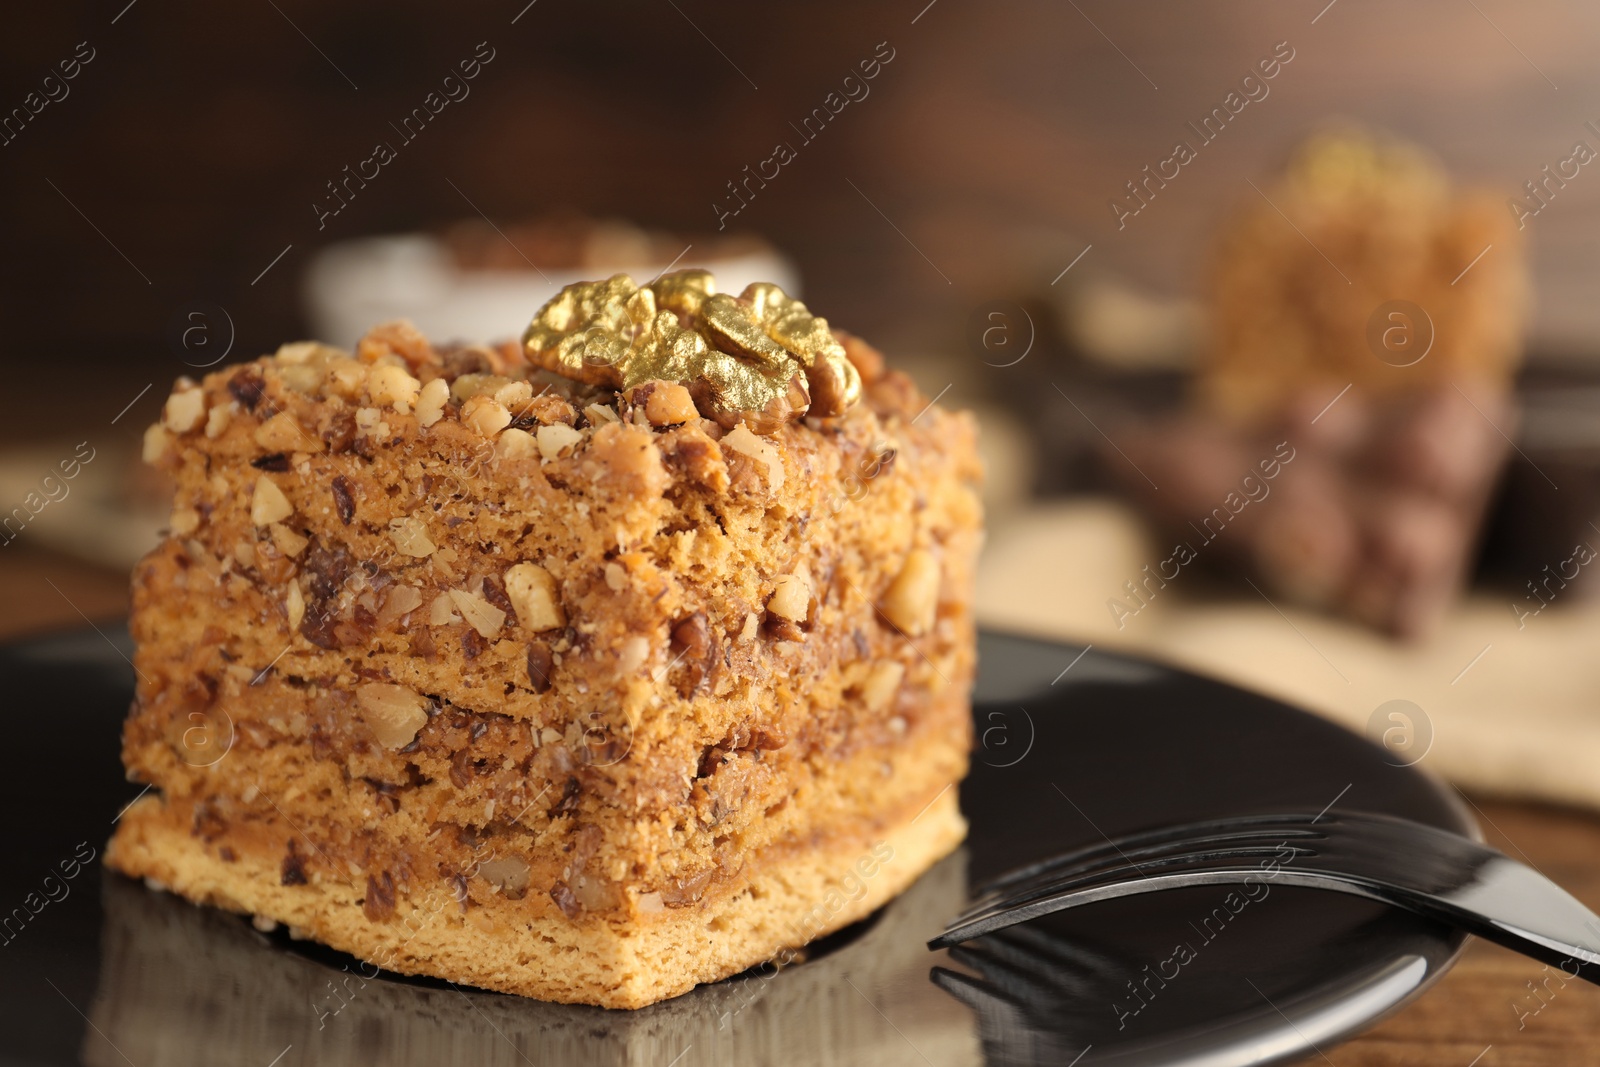 Photo of Piece of honey cake with walnuts and fork on plate, closeup